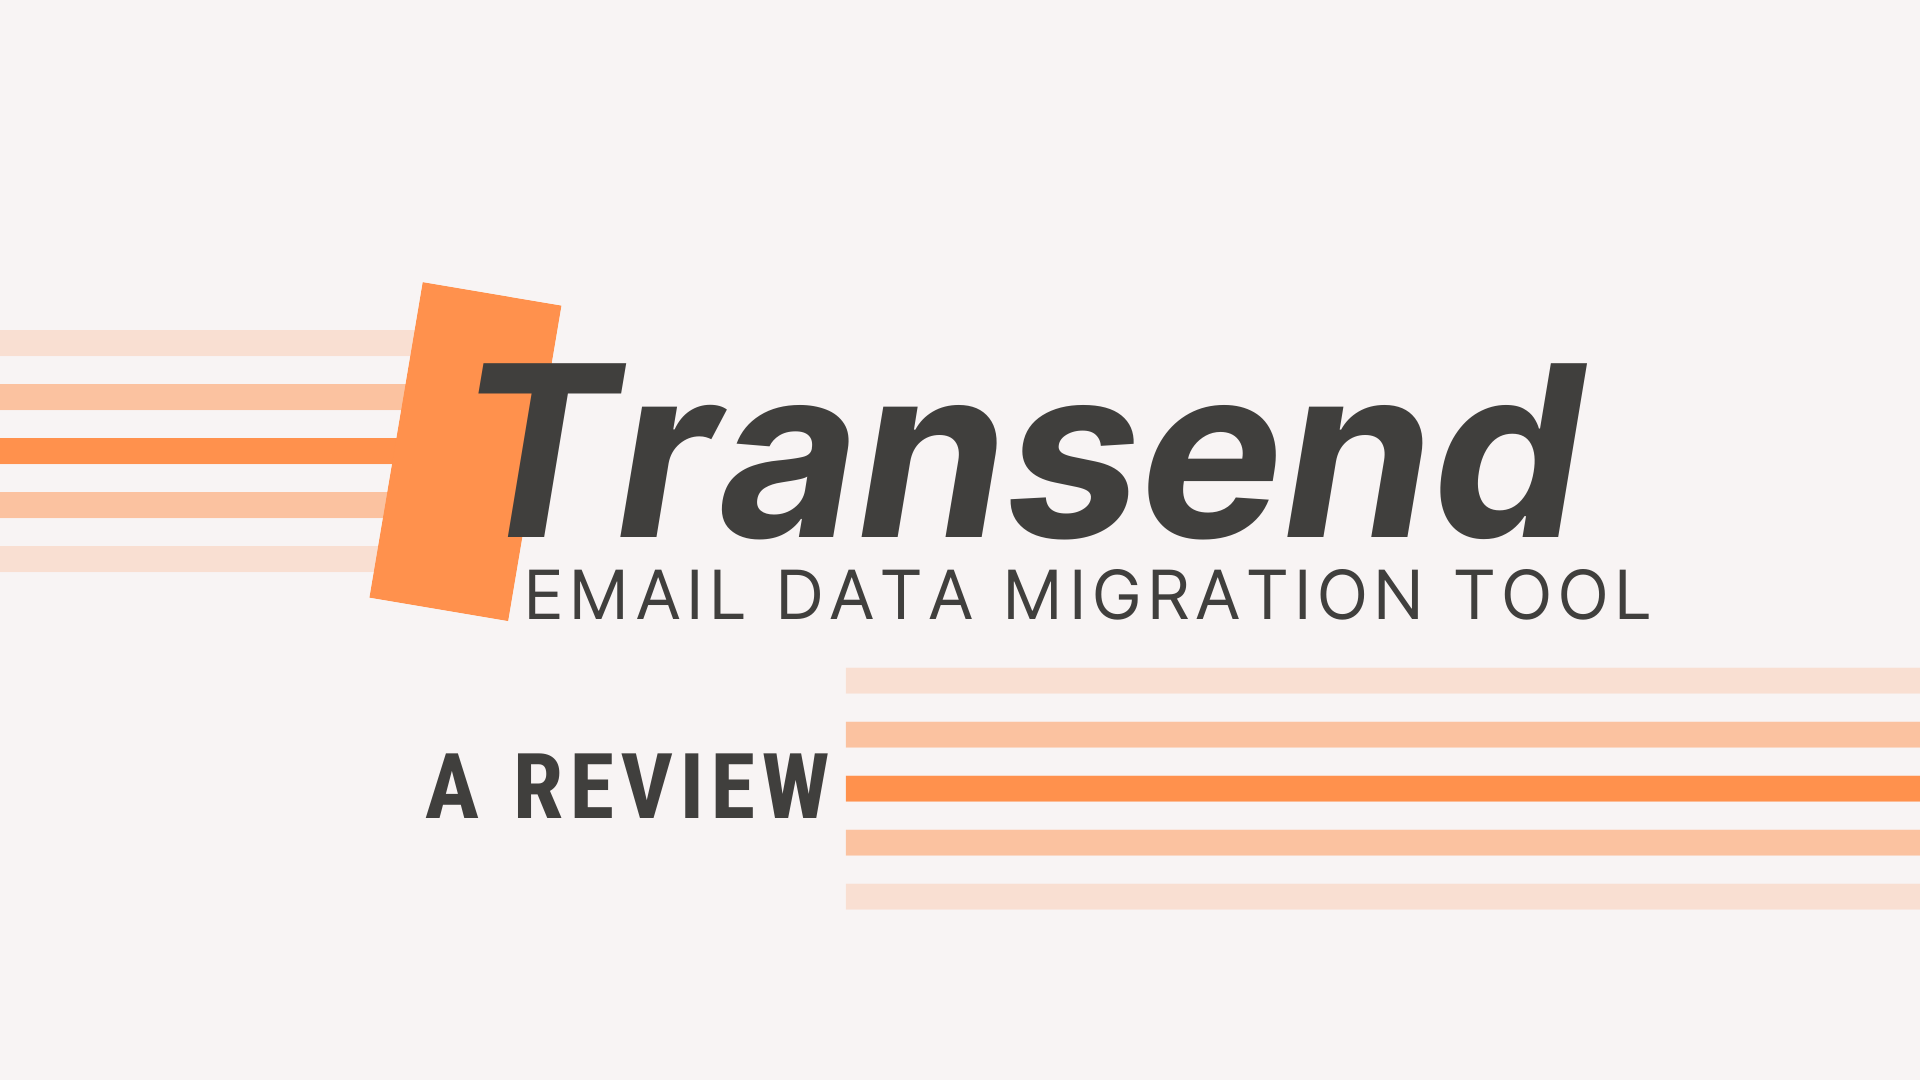 Transend email data migration tool